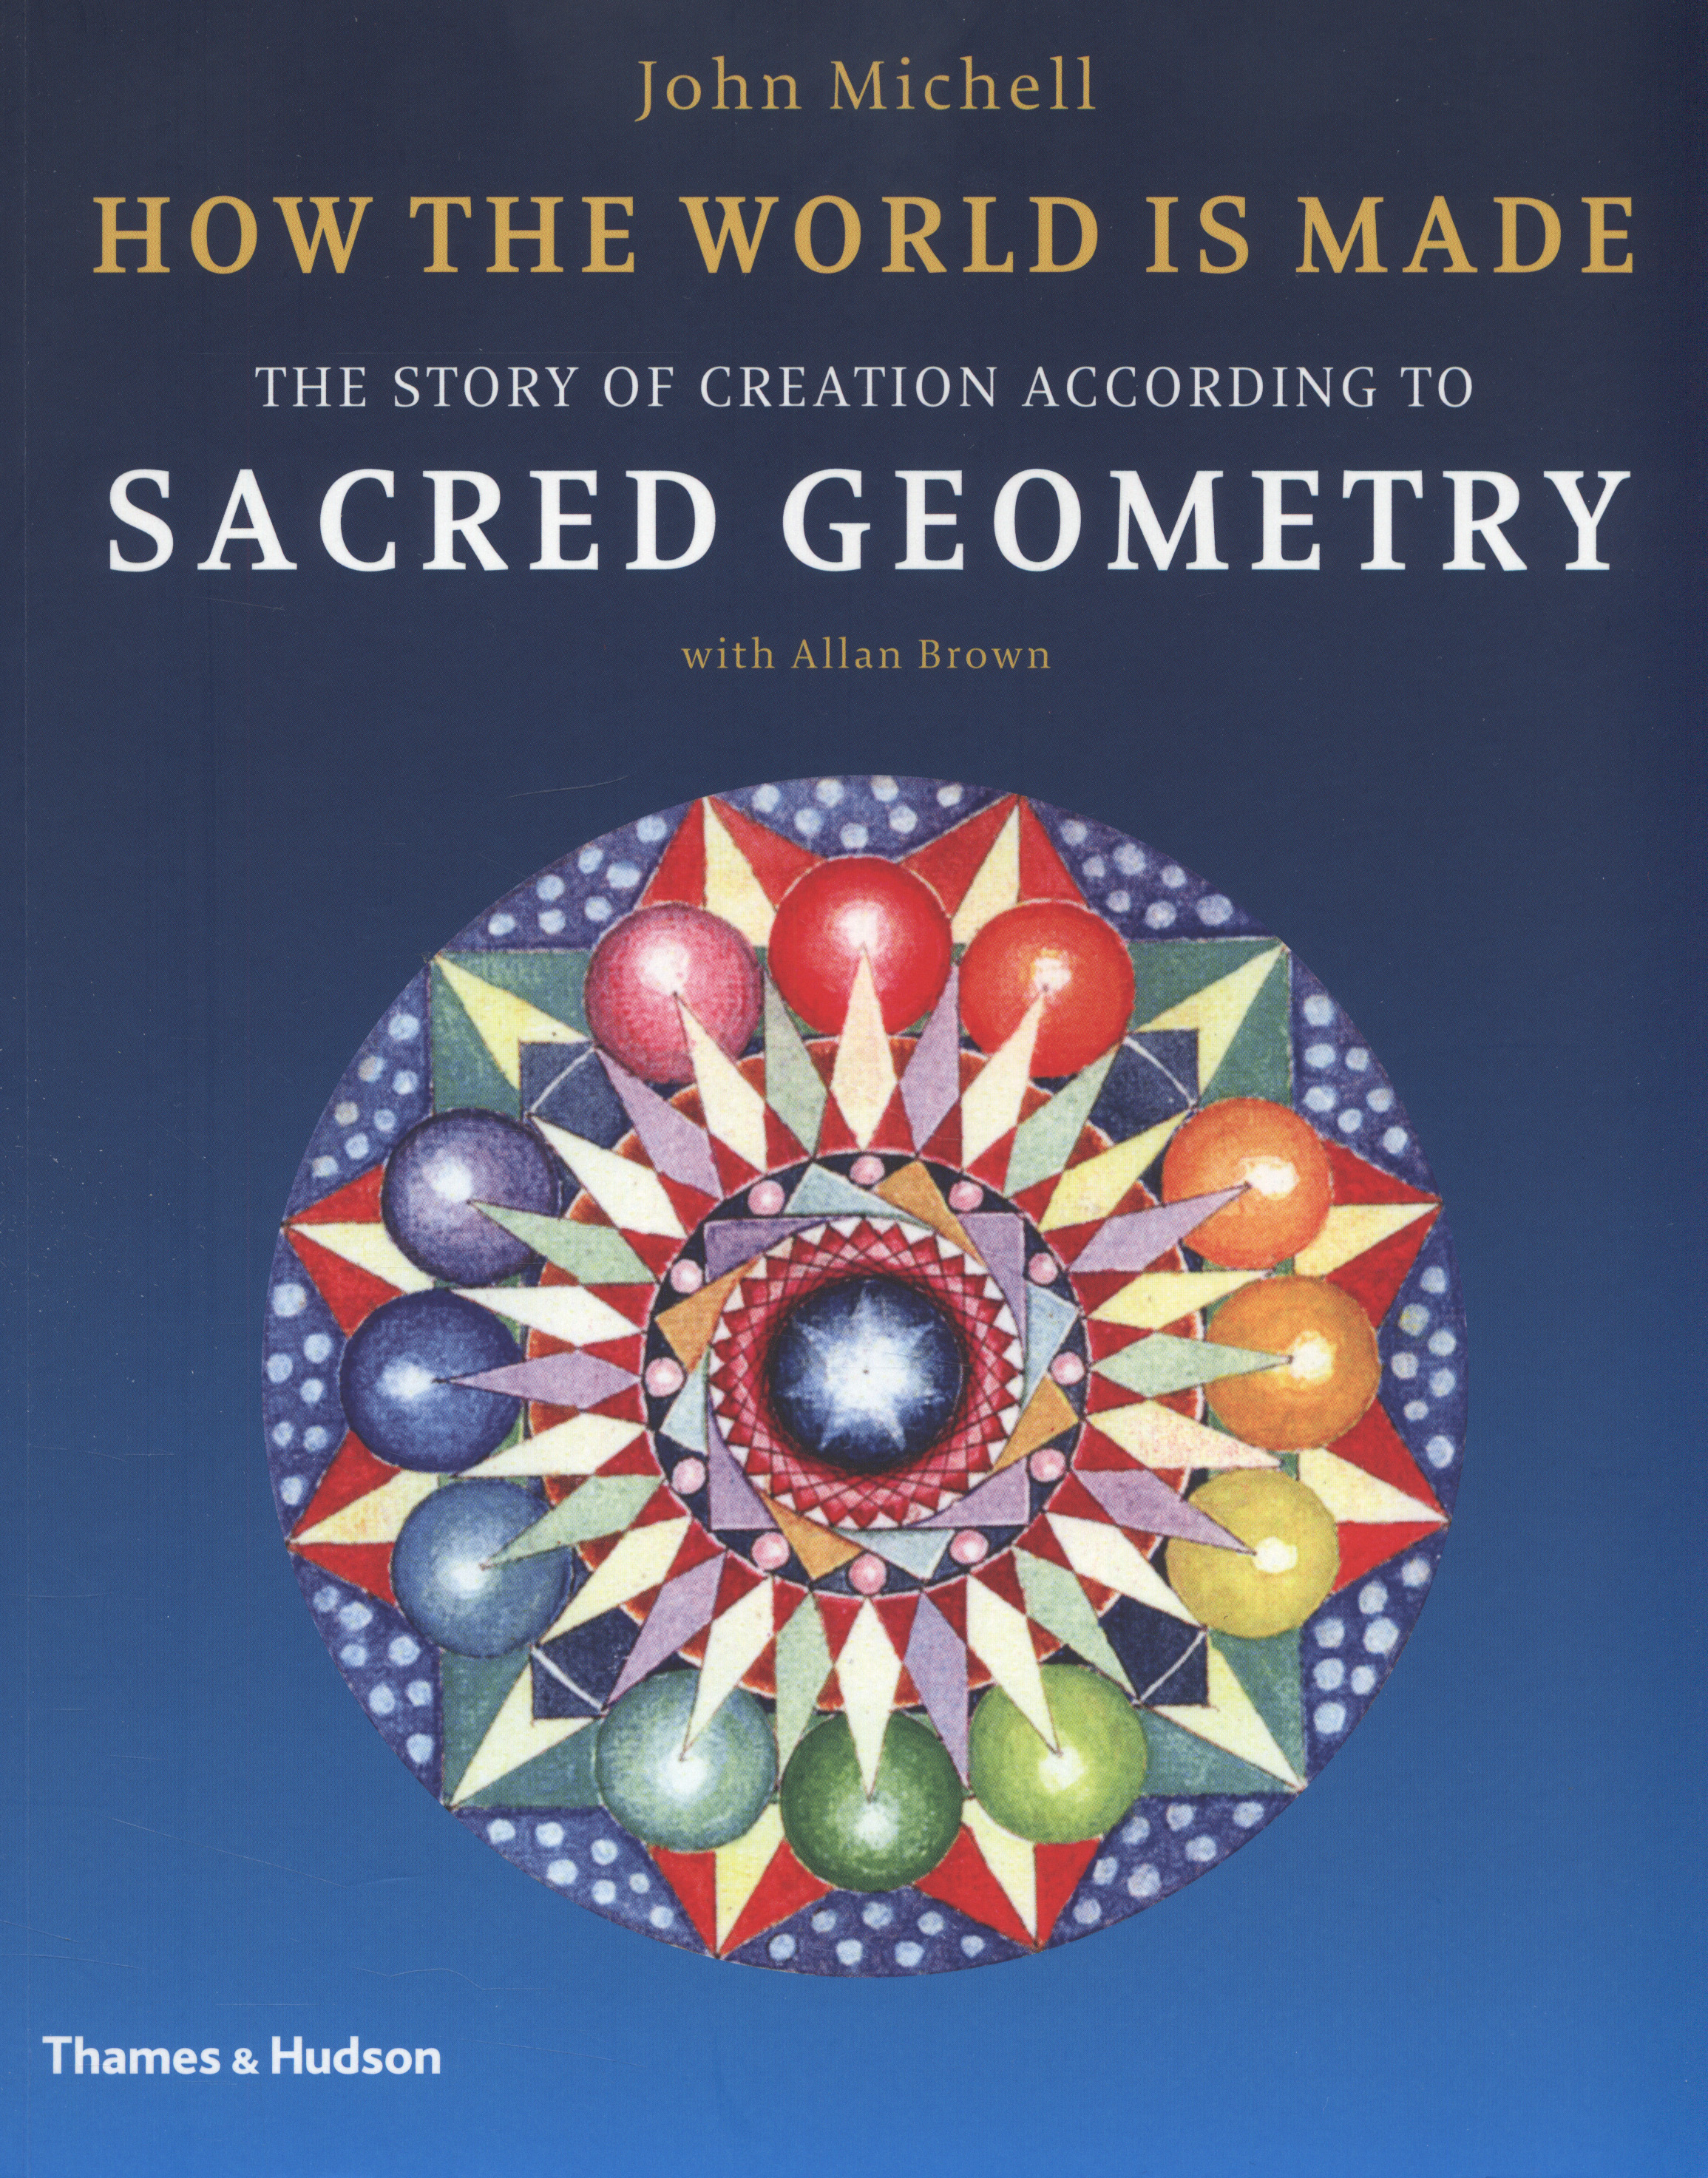 How the world is made the story of creation according to sacred geometry by Michell, John